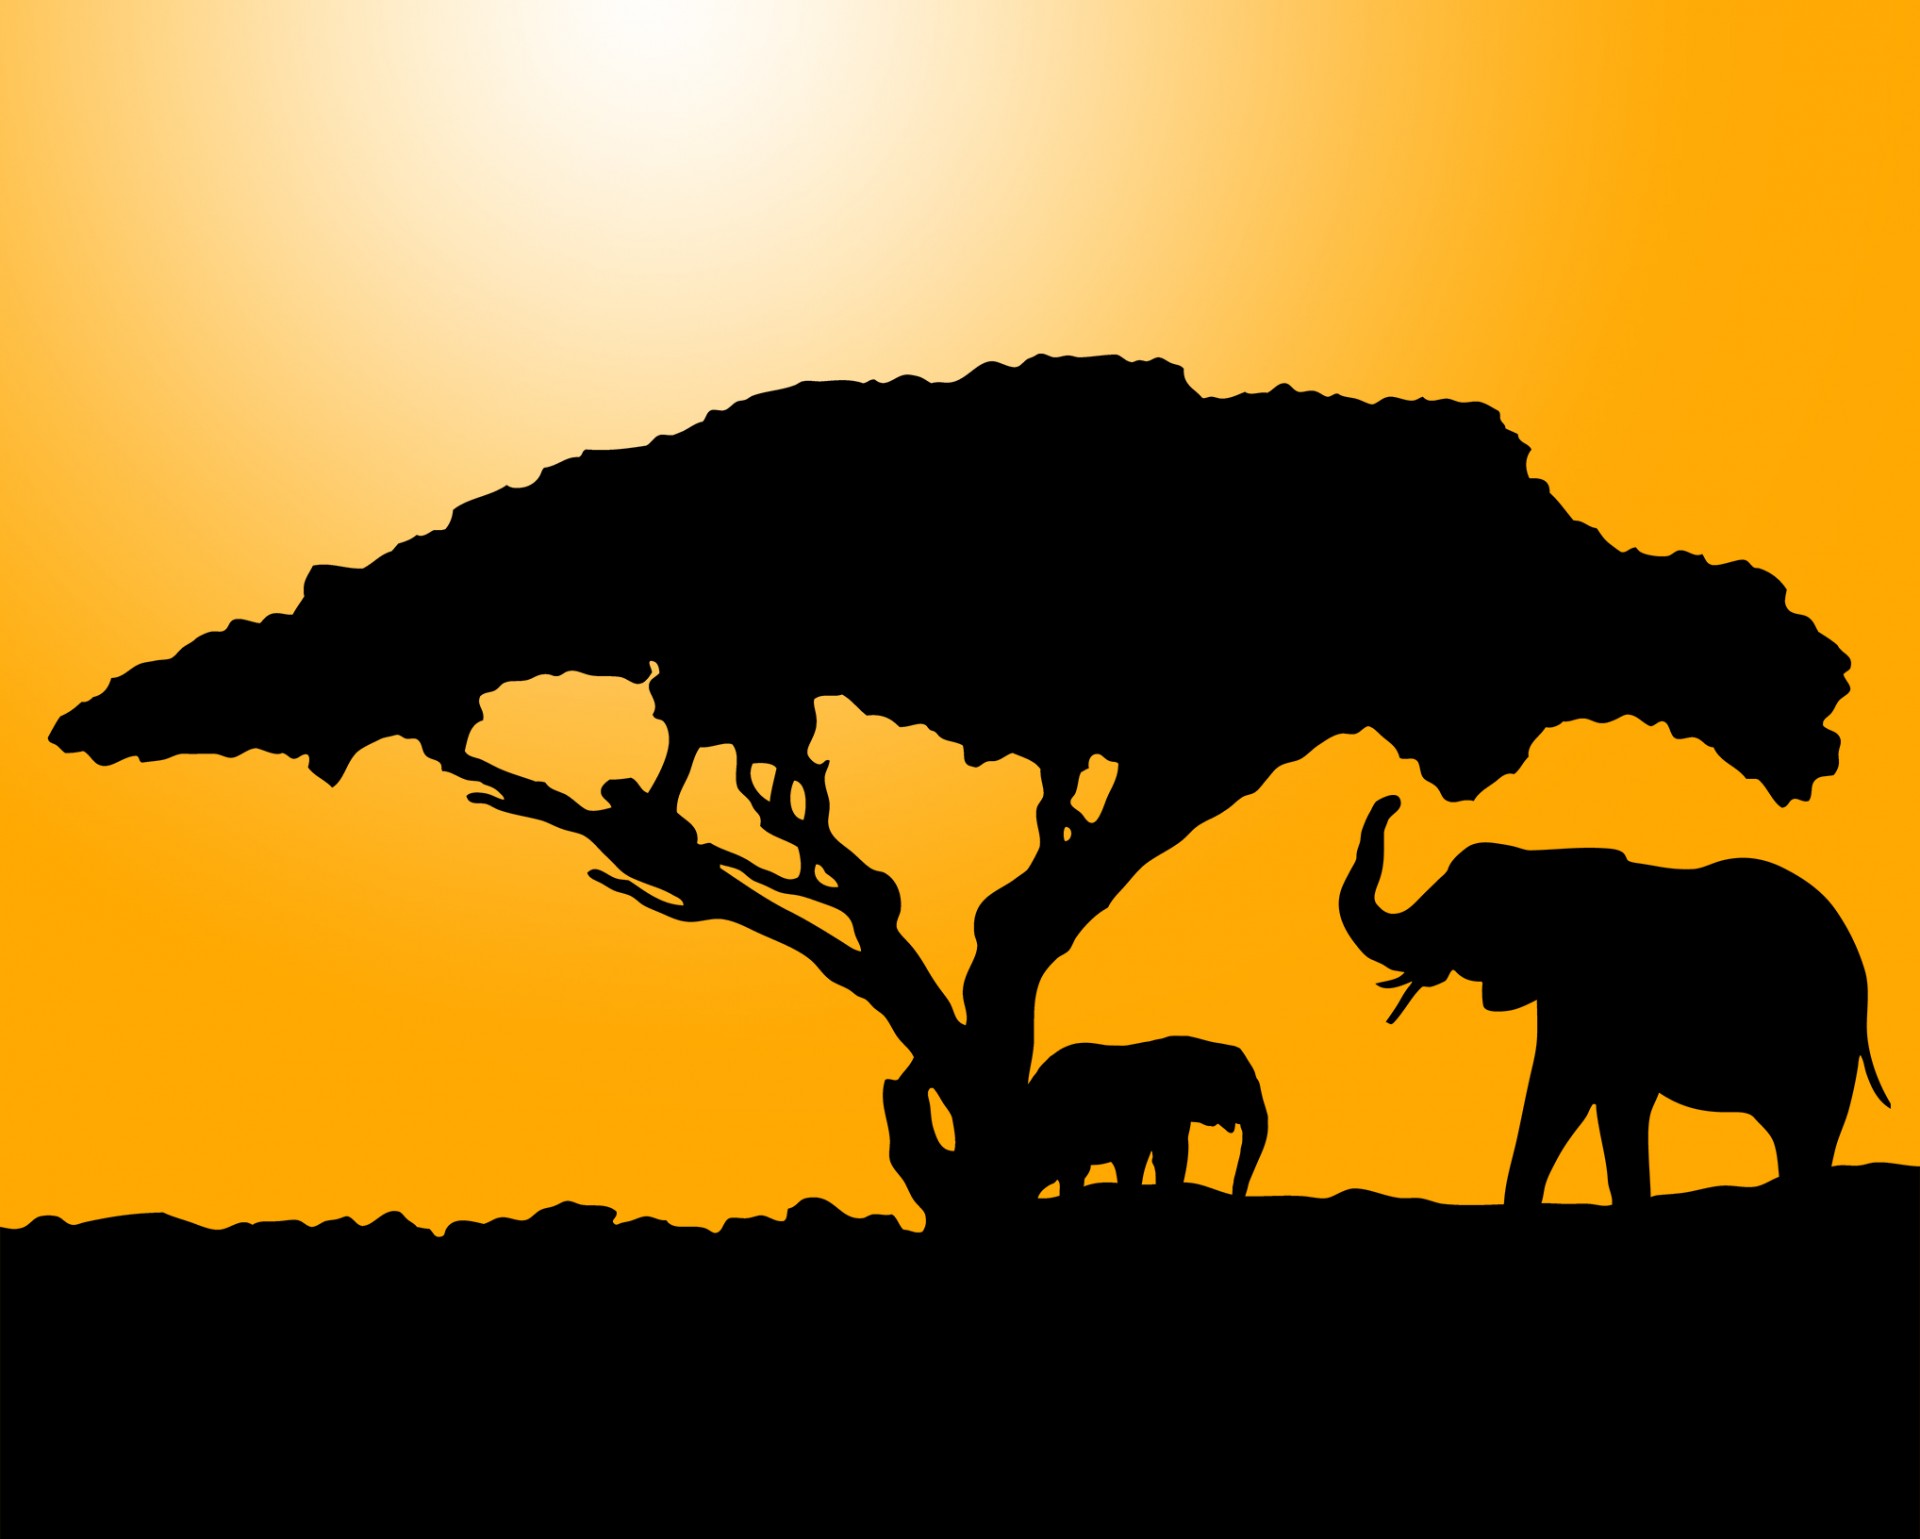 Elephant Silhouette At Sunset Free Stock Photo - Public Domain Pictures